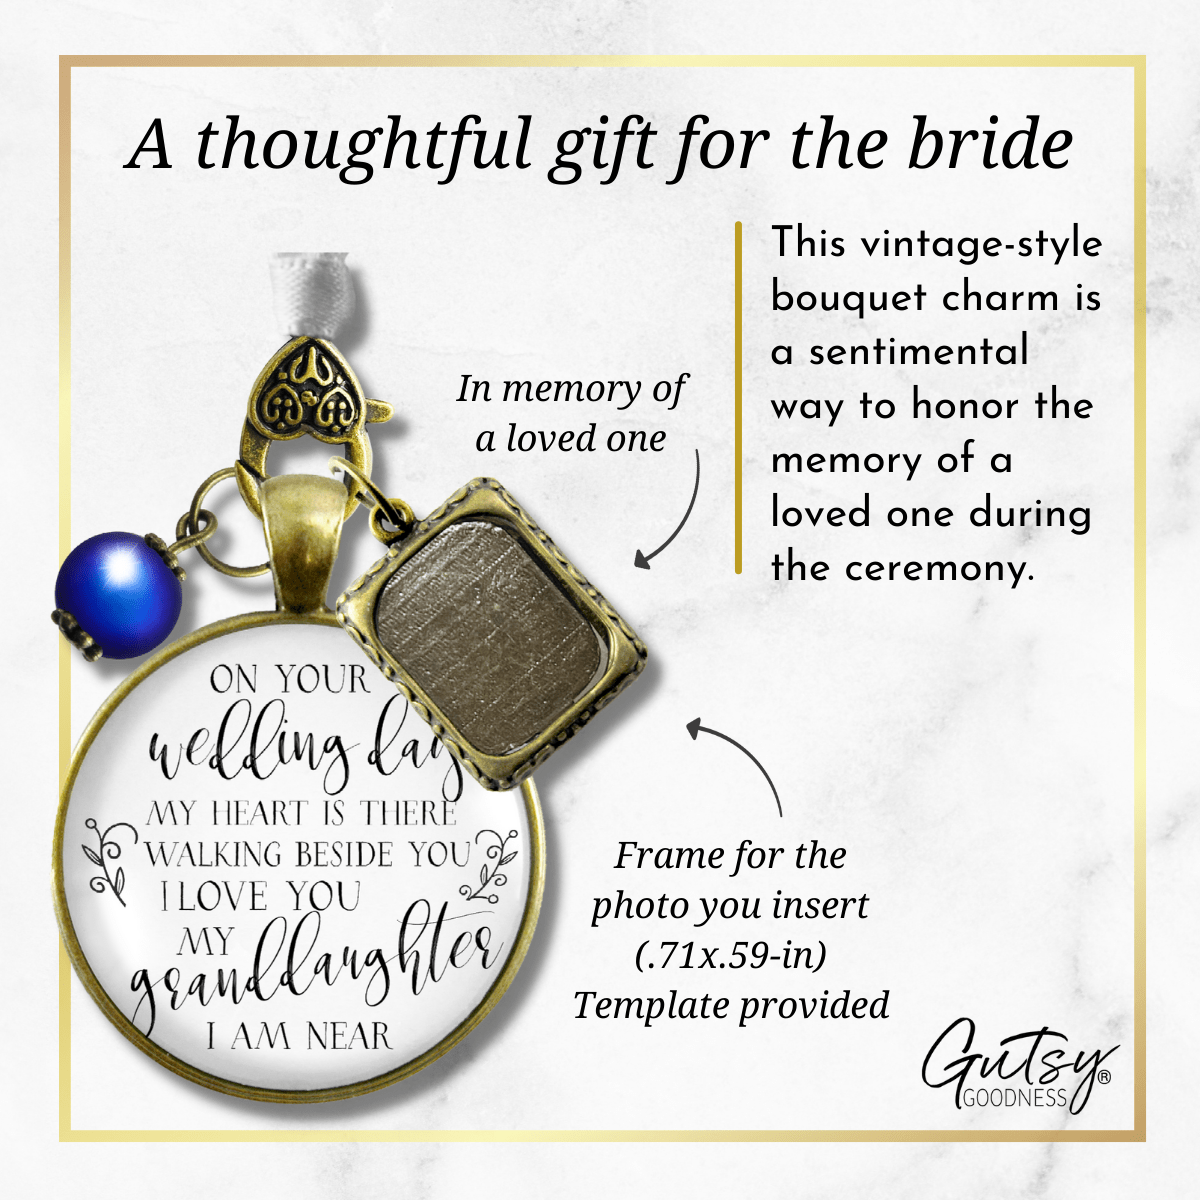 On Your Wedding Day MY Heart Is There Walking Beside You GRANDDAUGHTER - BRONZE - WHITE - BLUE BEAD